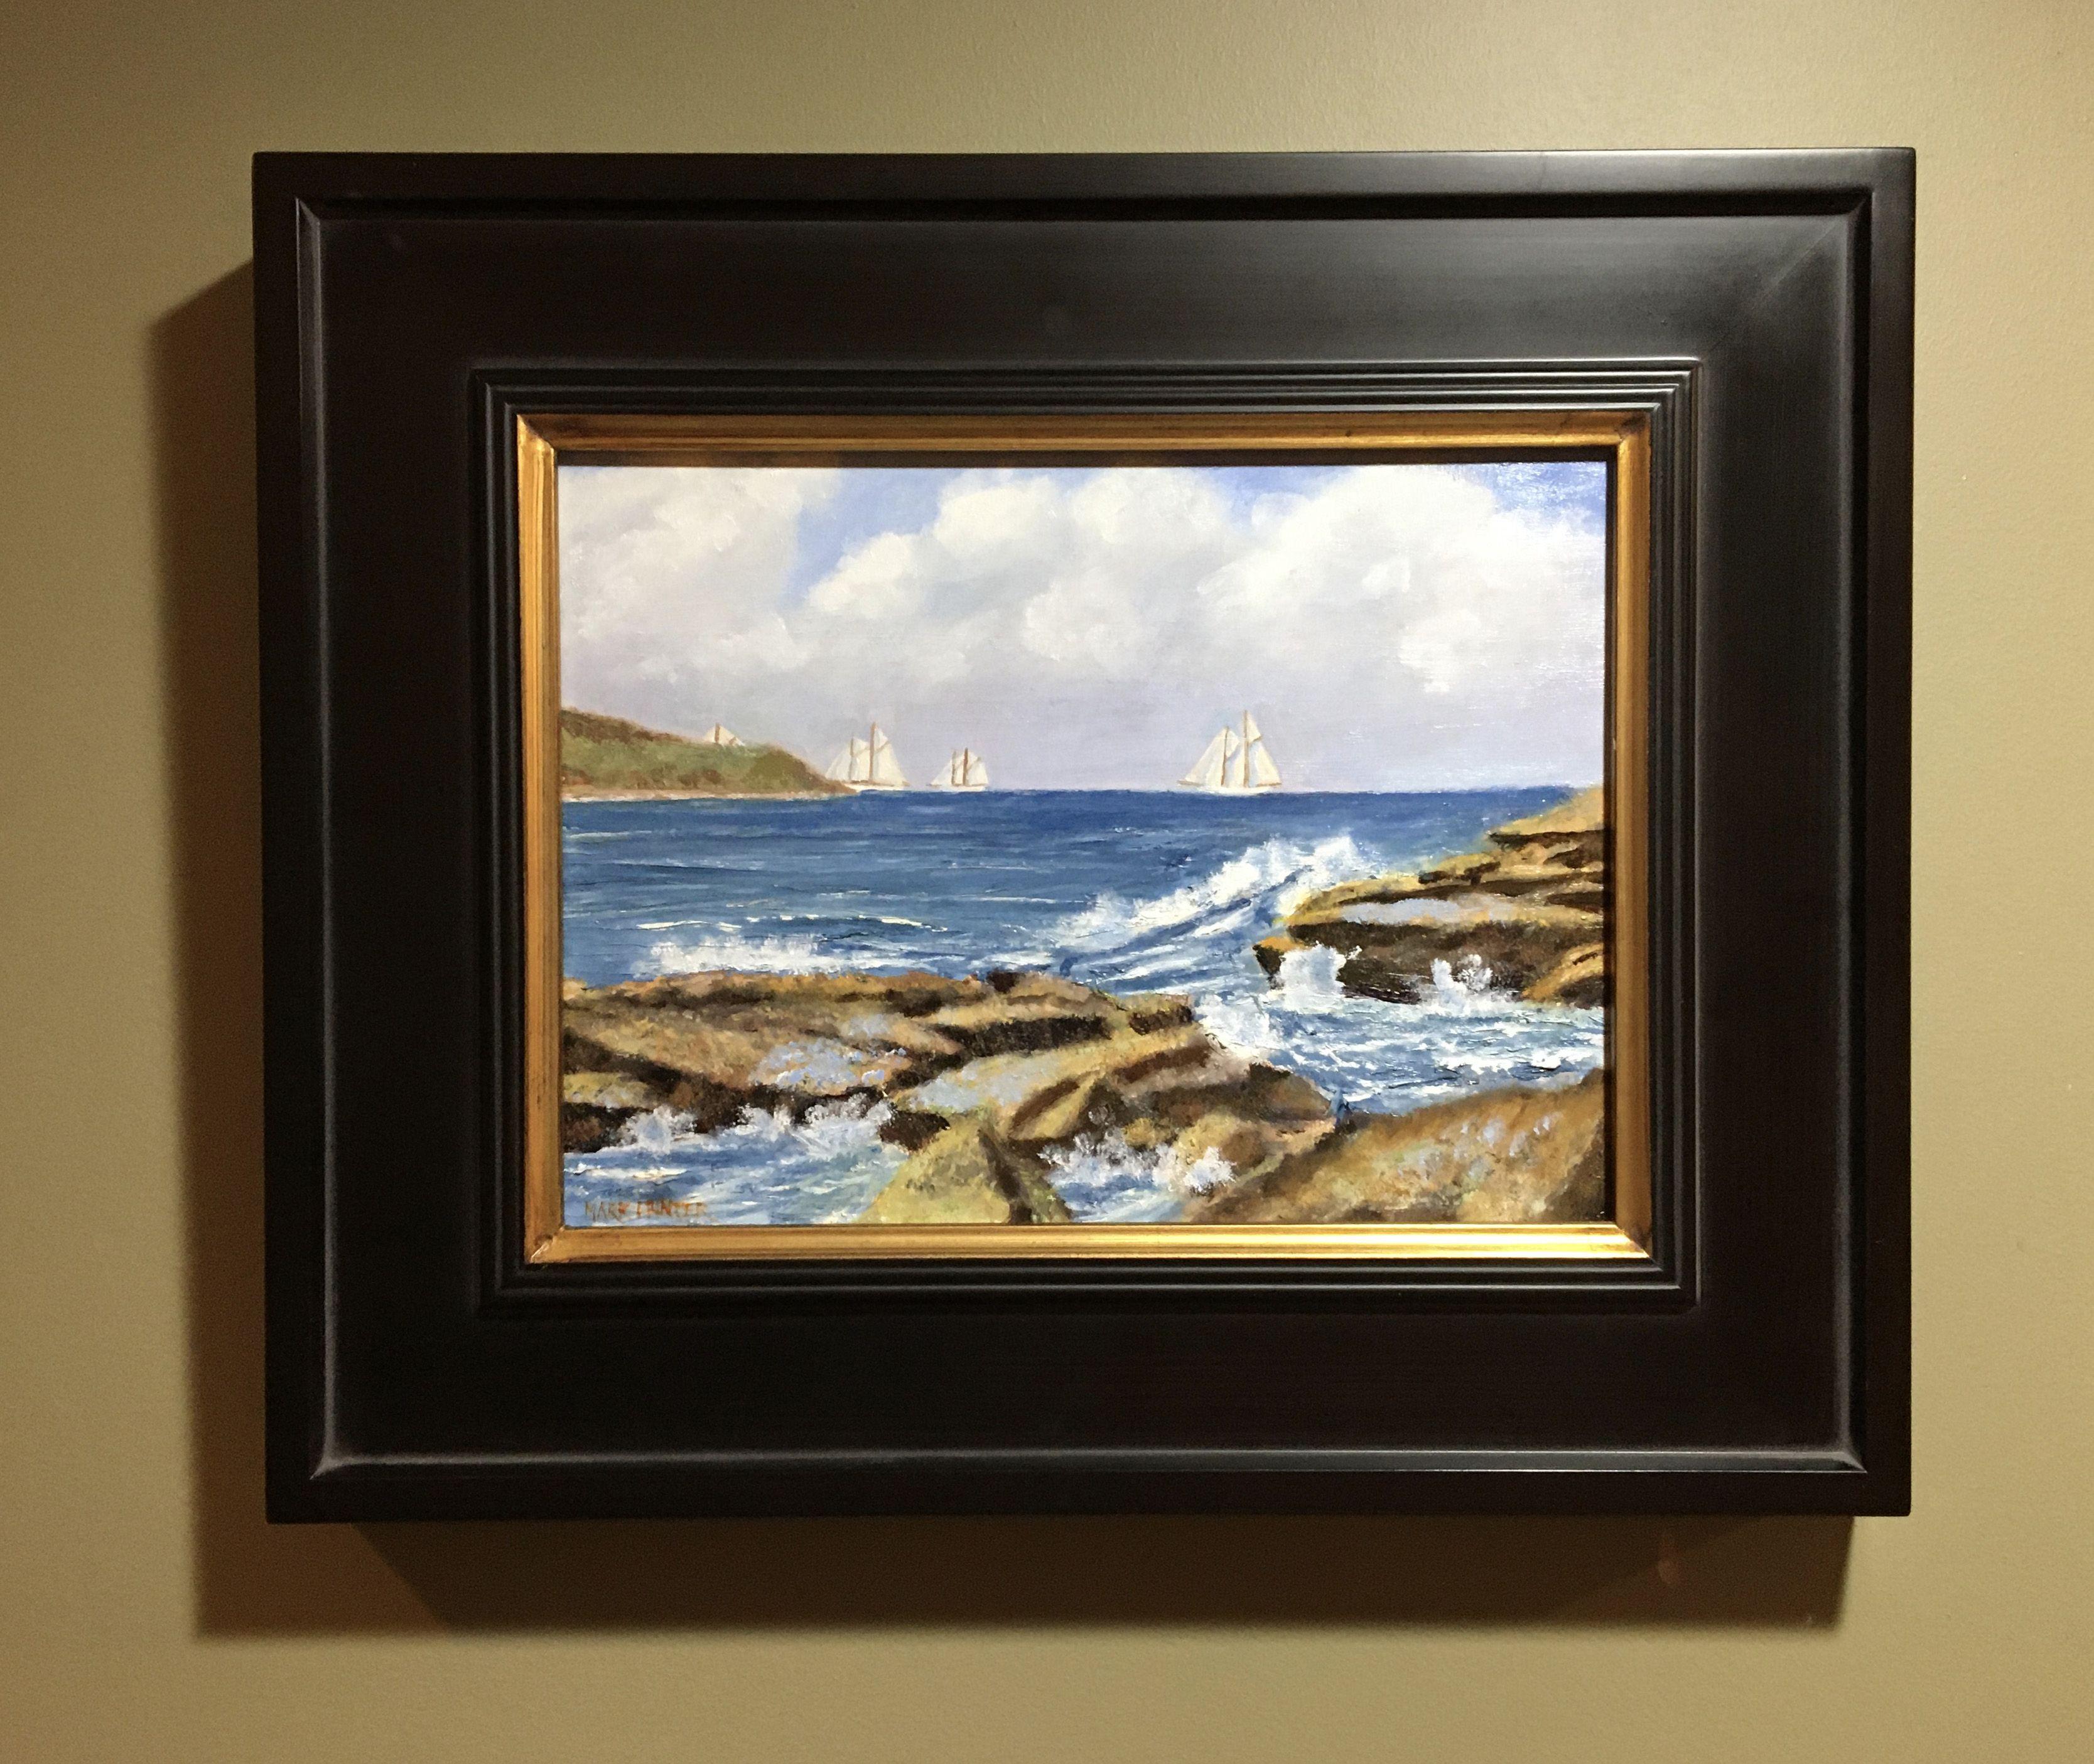 Waves crash on the rocky shore as schooners sail by in the distance.    Framed and ready to hang. 3